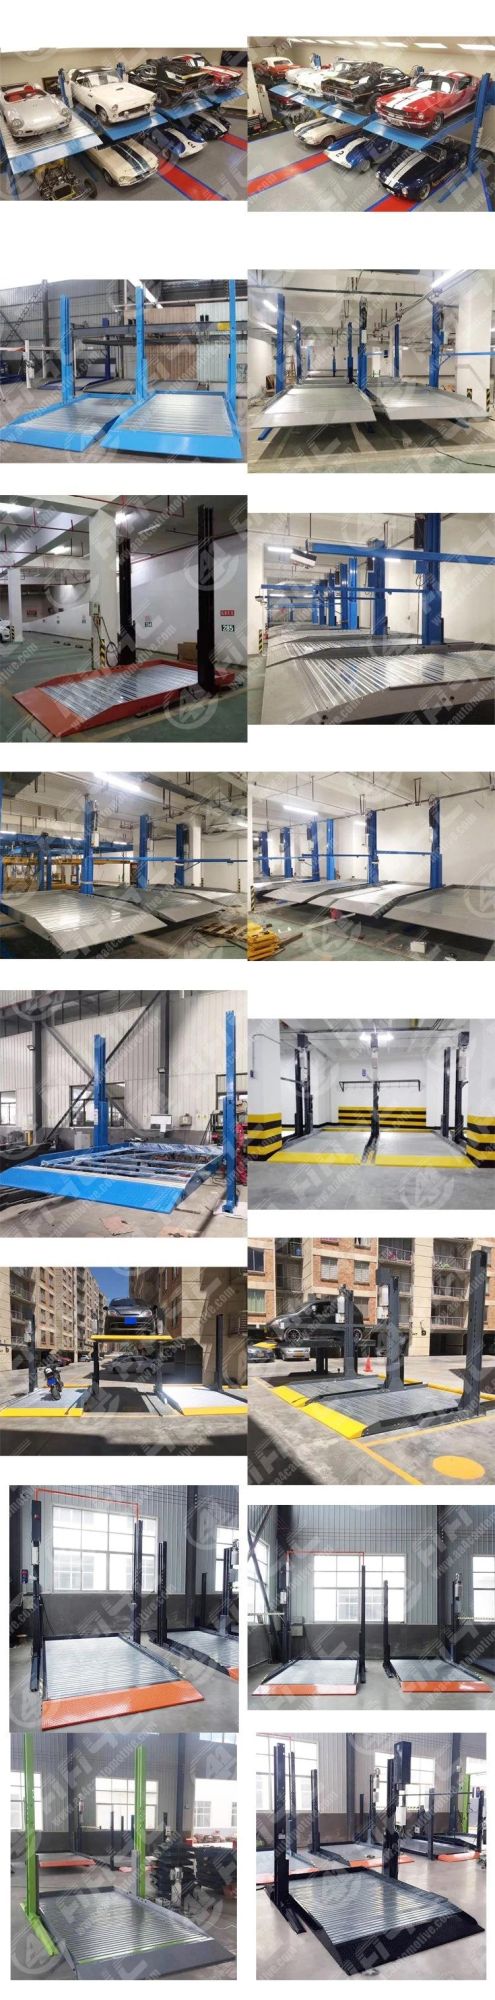 AA4c 2 Post Parking Lift Middle Post Shared 2 Post Vehicle Parking Lift 2.3t/2.7t/3.2t Auto Parking System AA-2PP30